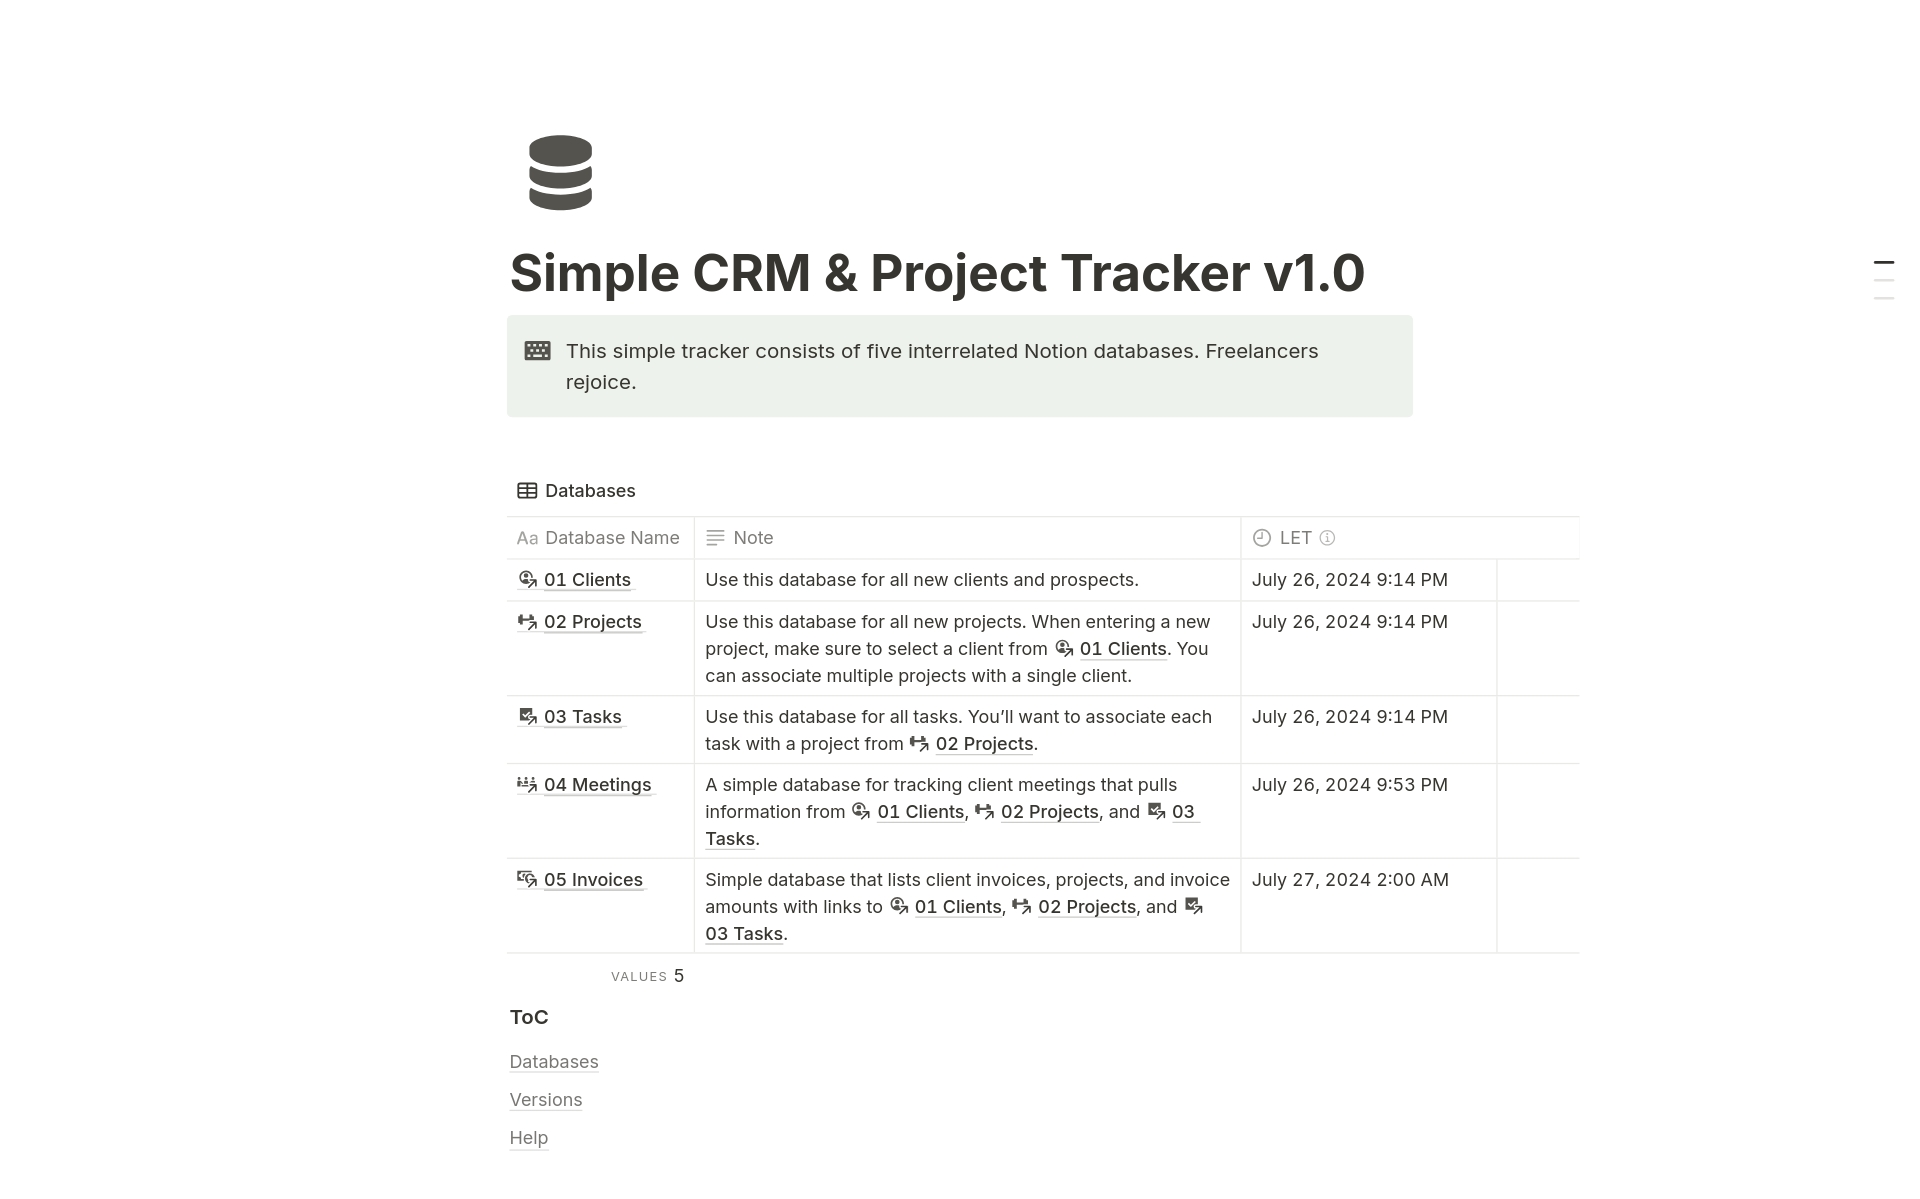 The Simple Notion CRM & Project Tracker allows freelancers to track clients, projects, tasks, meetings, and invoices in Notion. These five interconnected databases work seamlessly together and serve as a one-stop shop of sorts. 